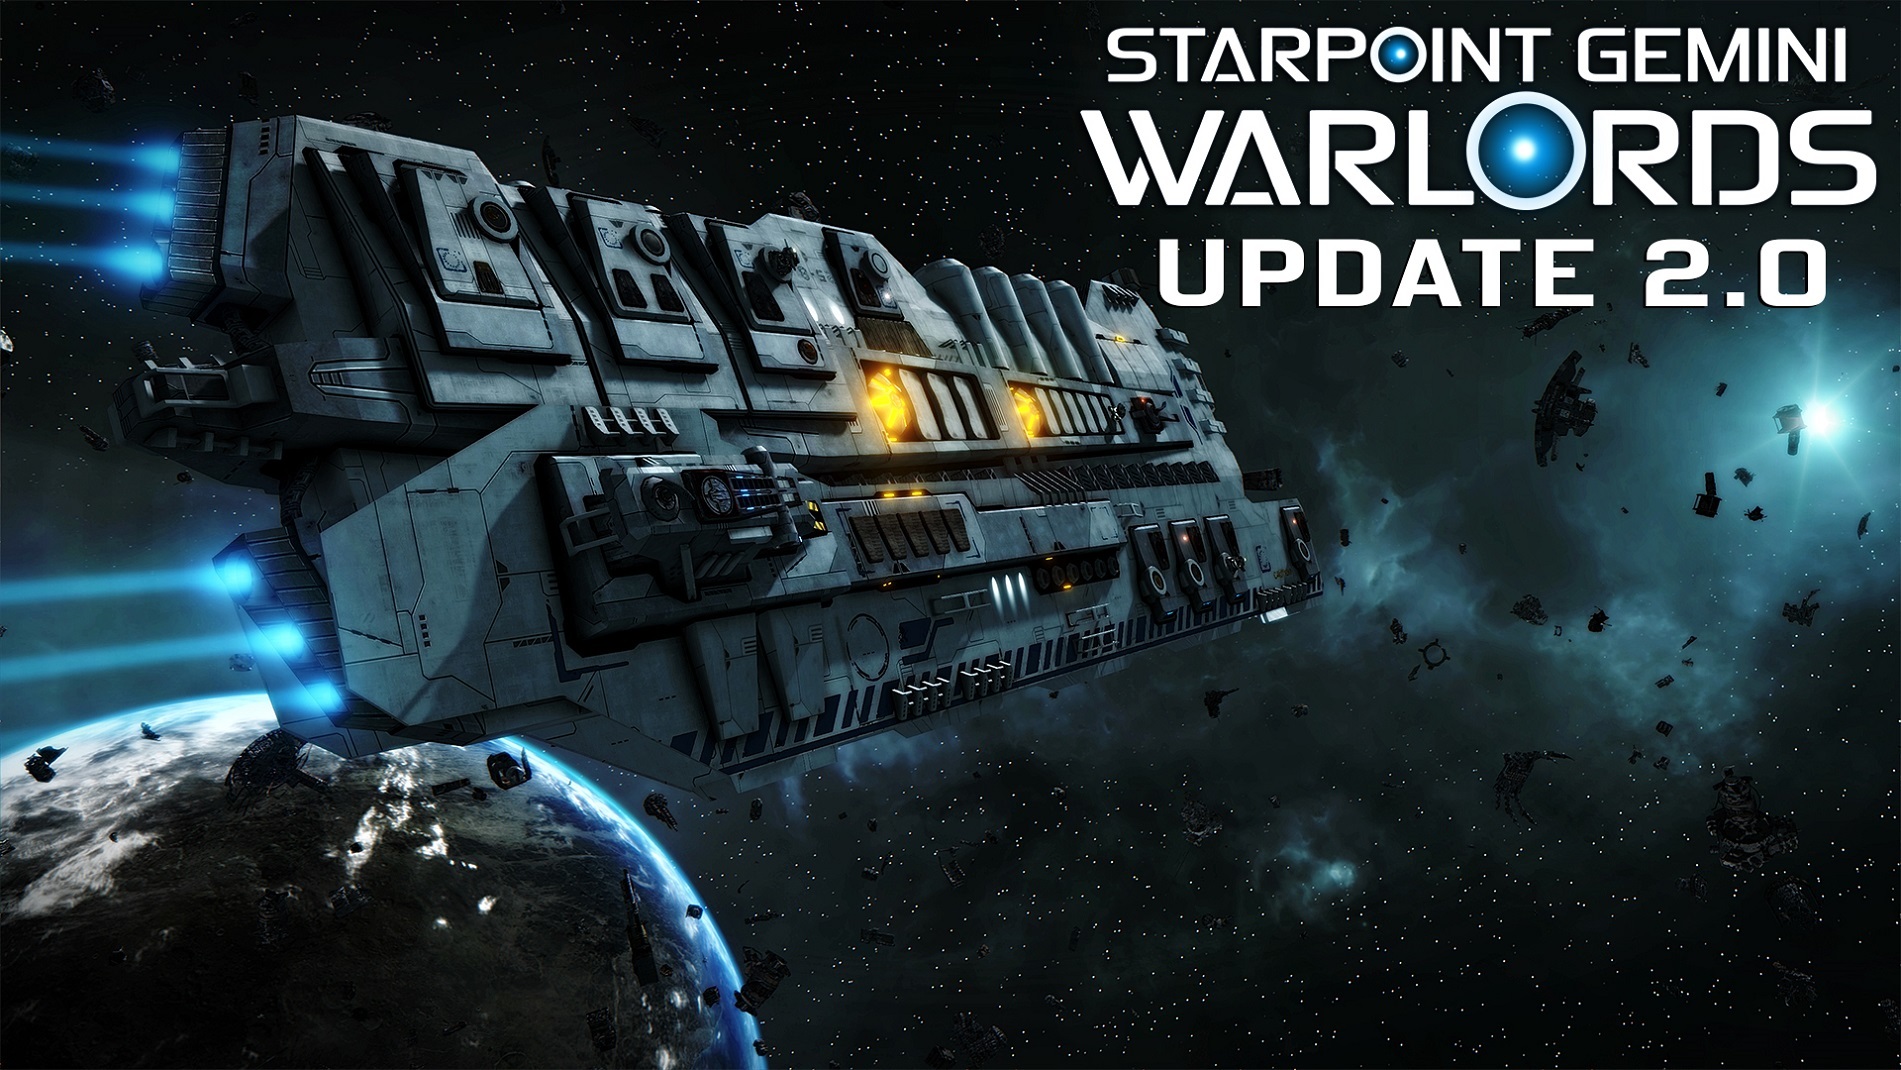 Steam Starpoint Gemini 2 Starpoint Gemini Warlords Successfully Executed Jump To Version 2 0